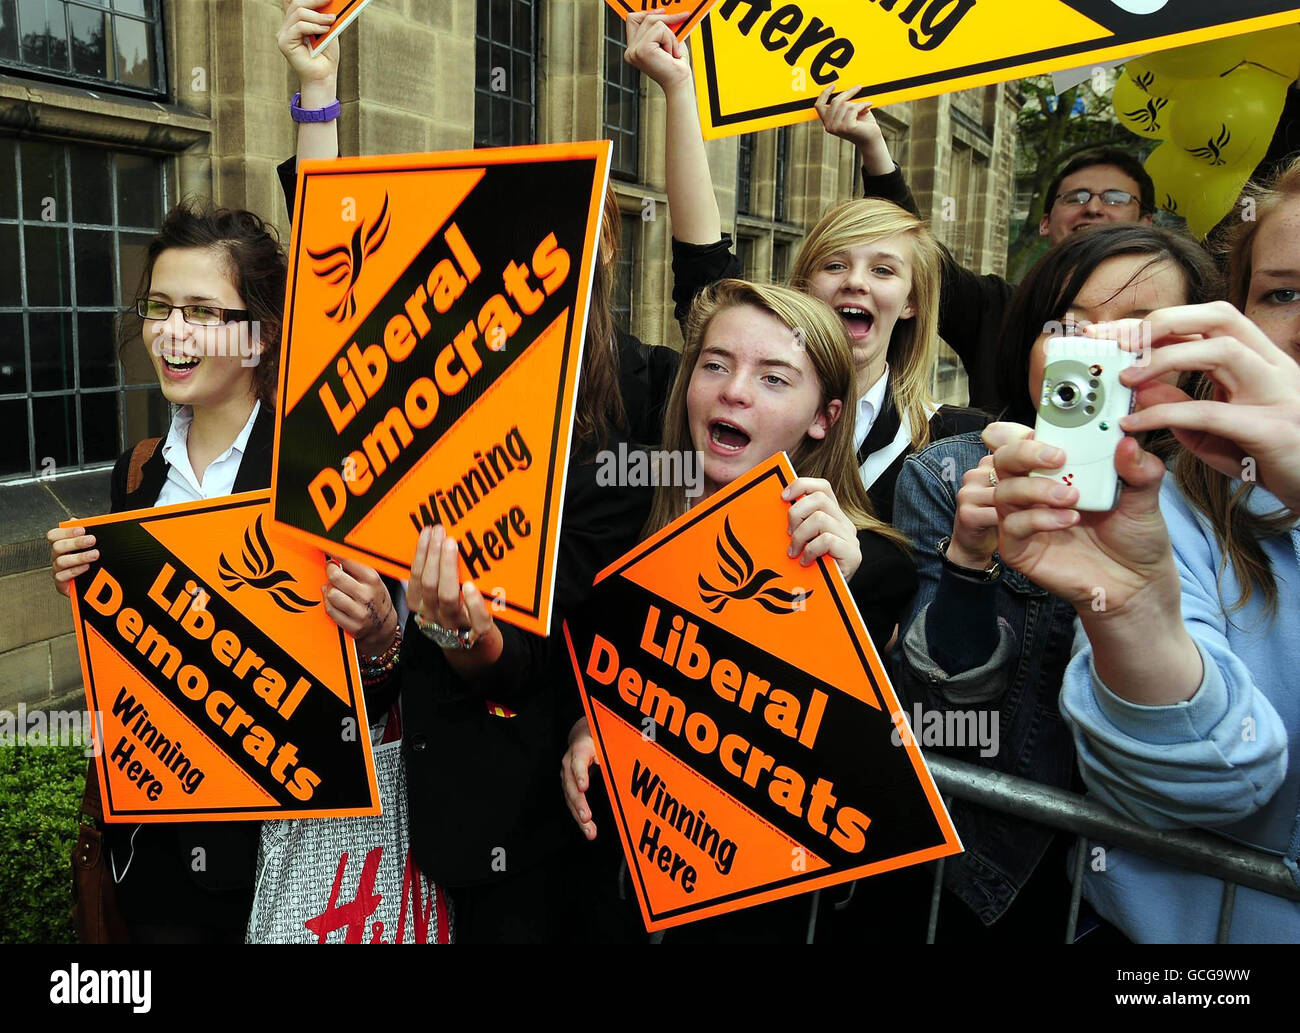 The Liberal Democrat Party leader Nick Clegg is cheered by young supporters as he arrives for a meeting with University students in Durham this afternoon. Stock Photo